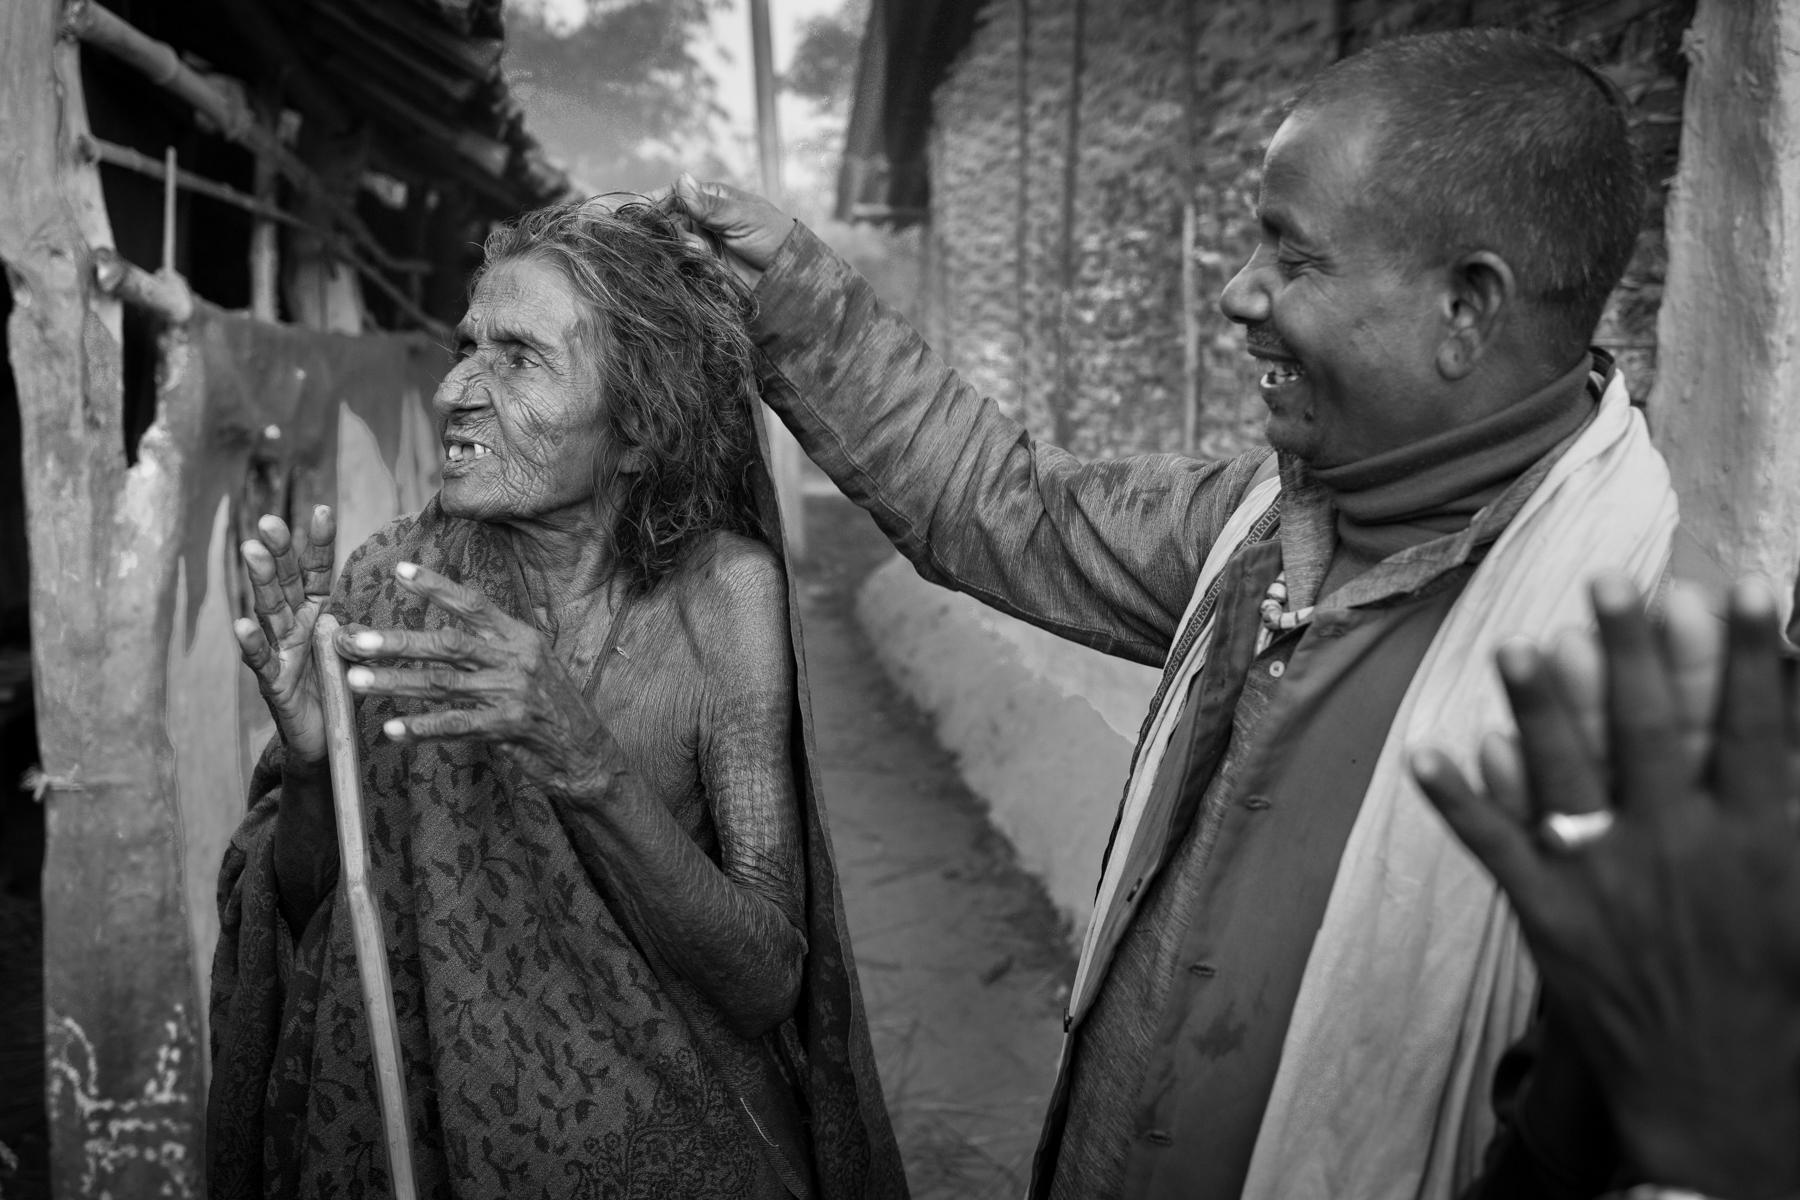 A dhami humiliates Kanti Yadav, 103, as he accuses her of being a witch. 5 November 2014, Dhanusha, Nepal.